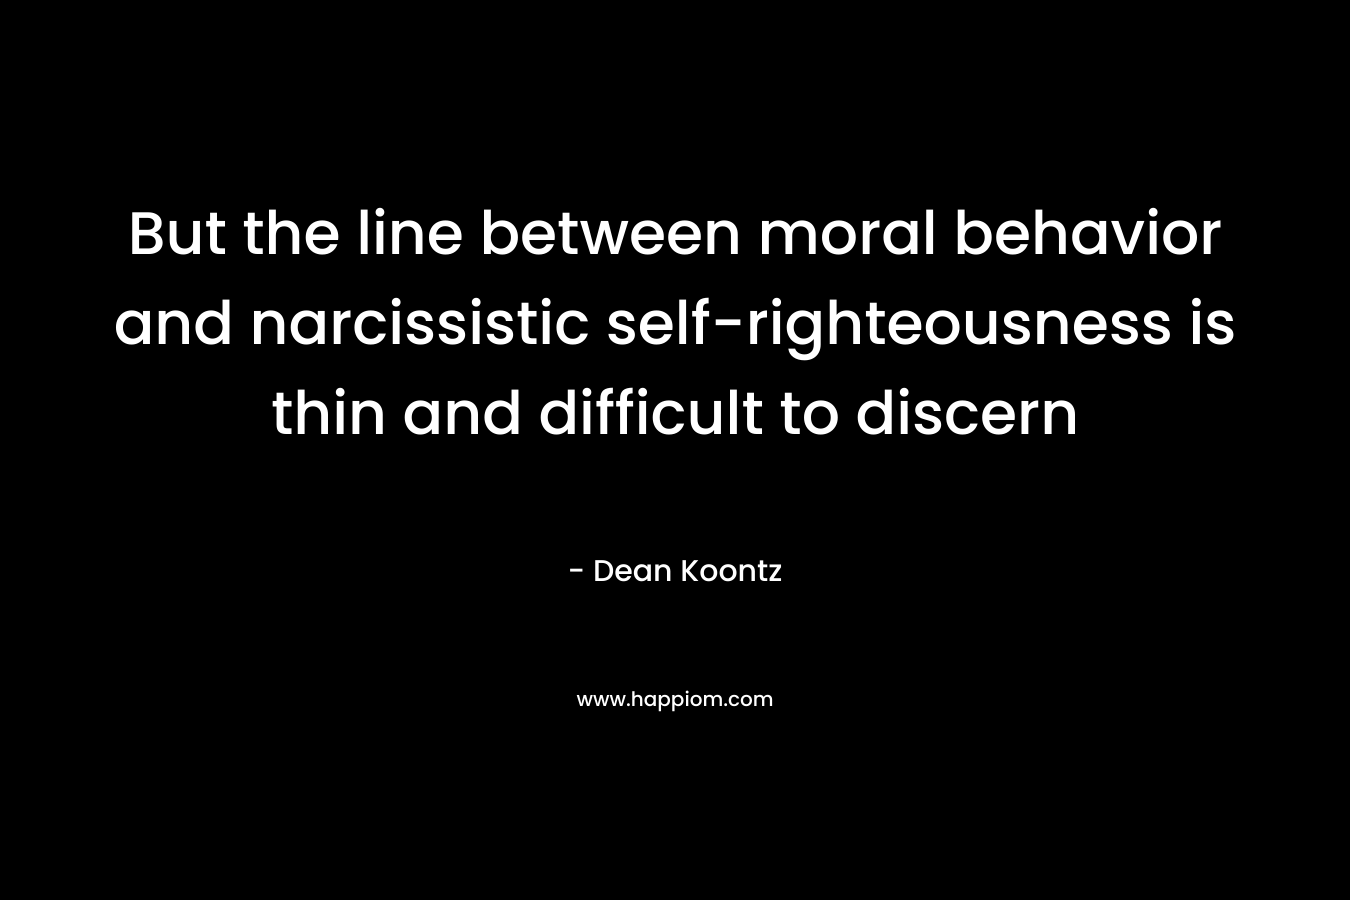 But the line between moral behavior and narcissistic self-righteousness is thin and difficult to discern – Dean Koontz